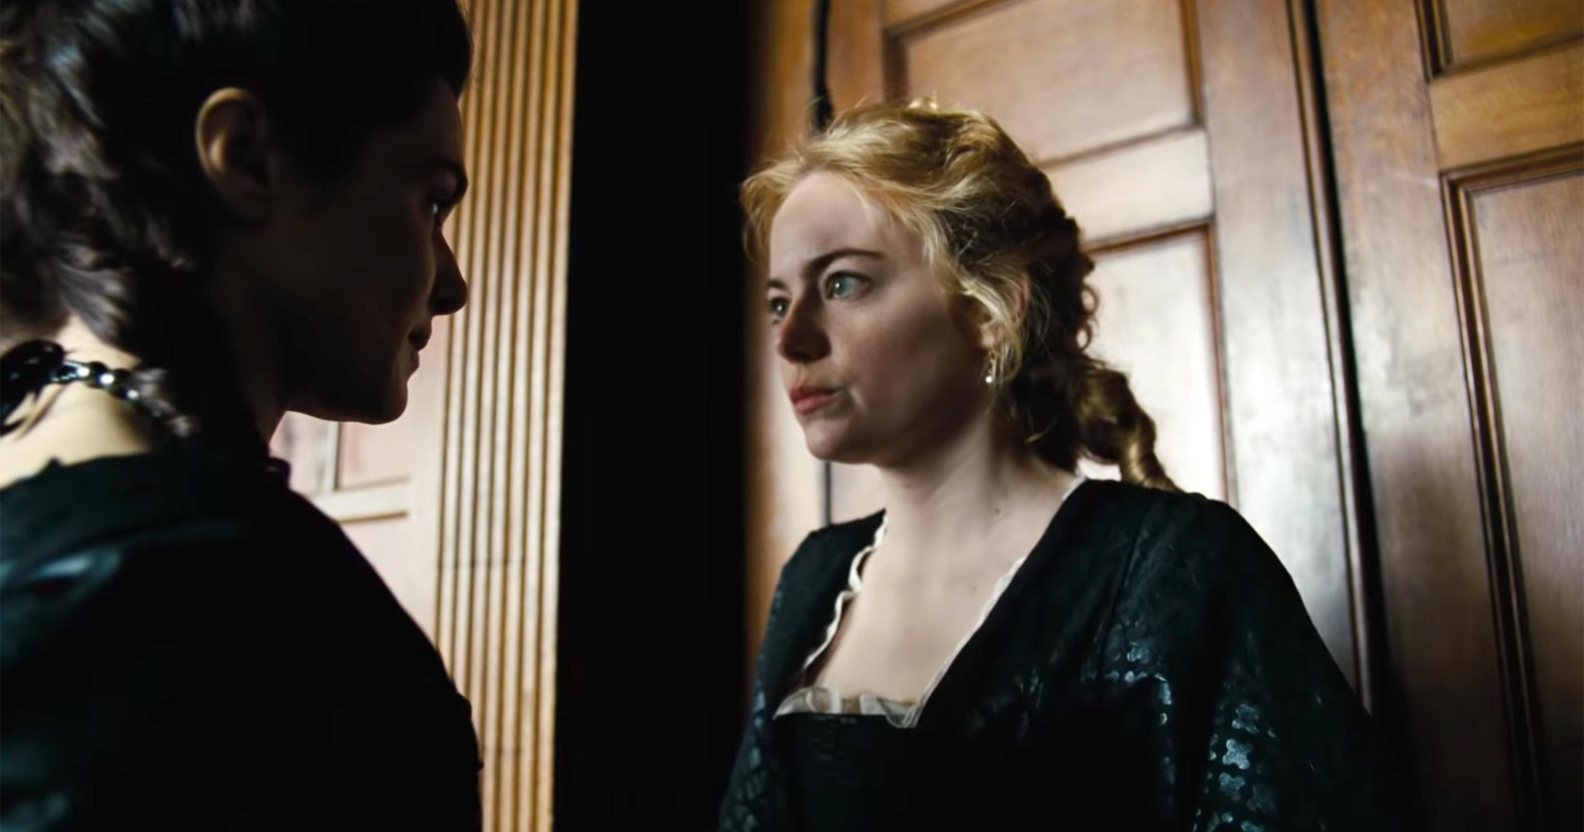 Emma Stone Nude Sex - Emma Stone insisted on being naked in lesbian film The Favourite | PinkNews